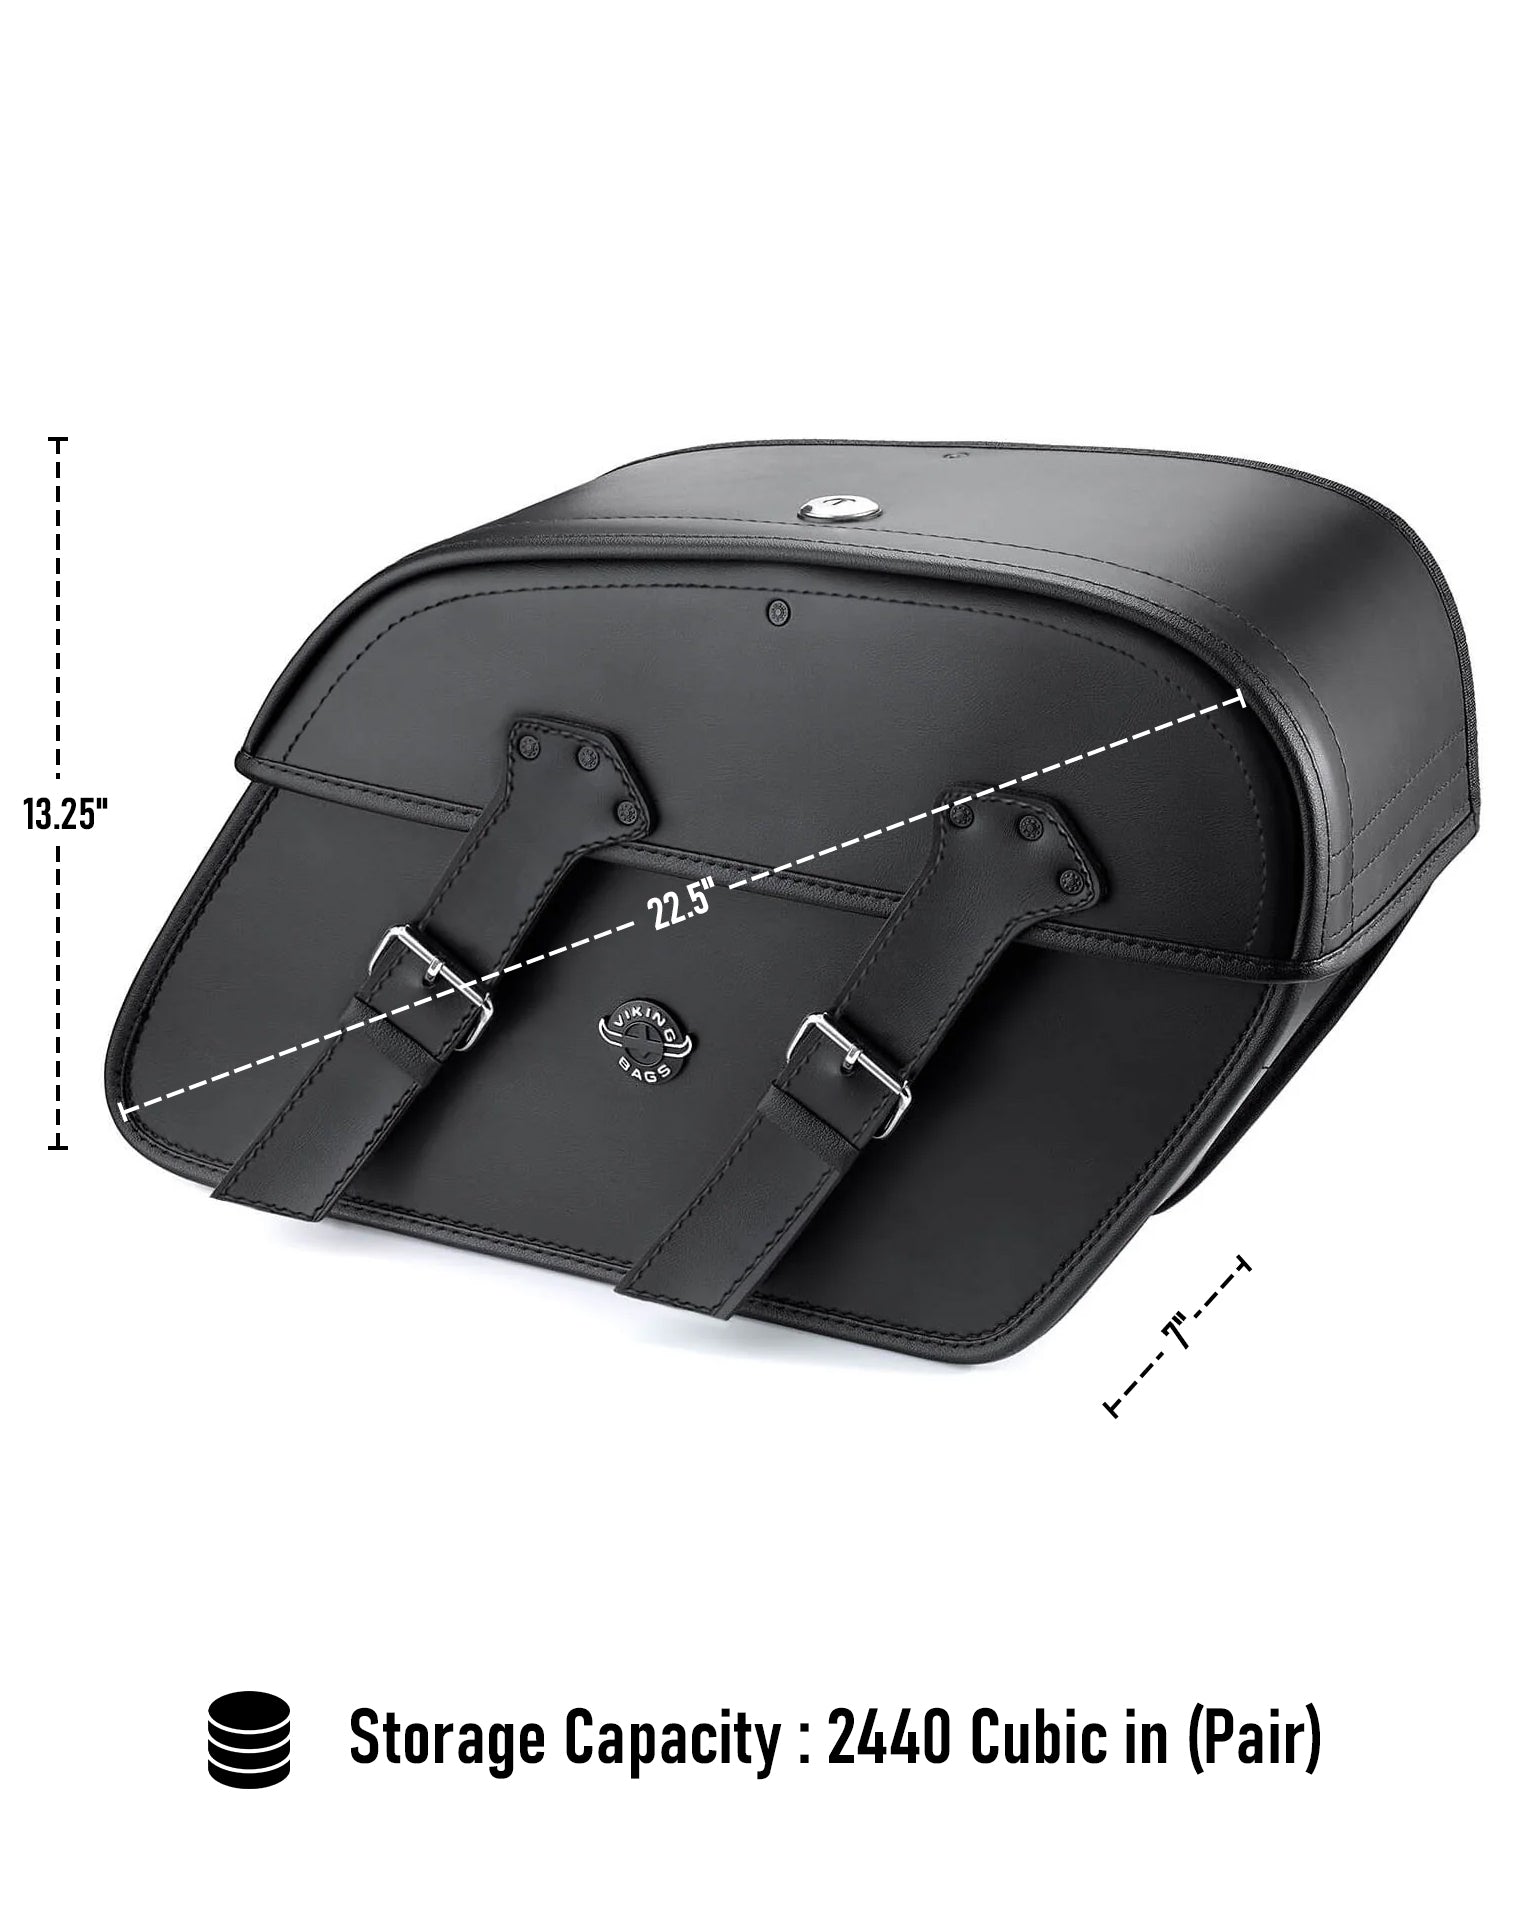 Viking Raven Extra Large Suzuki Boulevard C109 Leather Motorcycle Saddlebags Can Store Your Ridings Gears